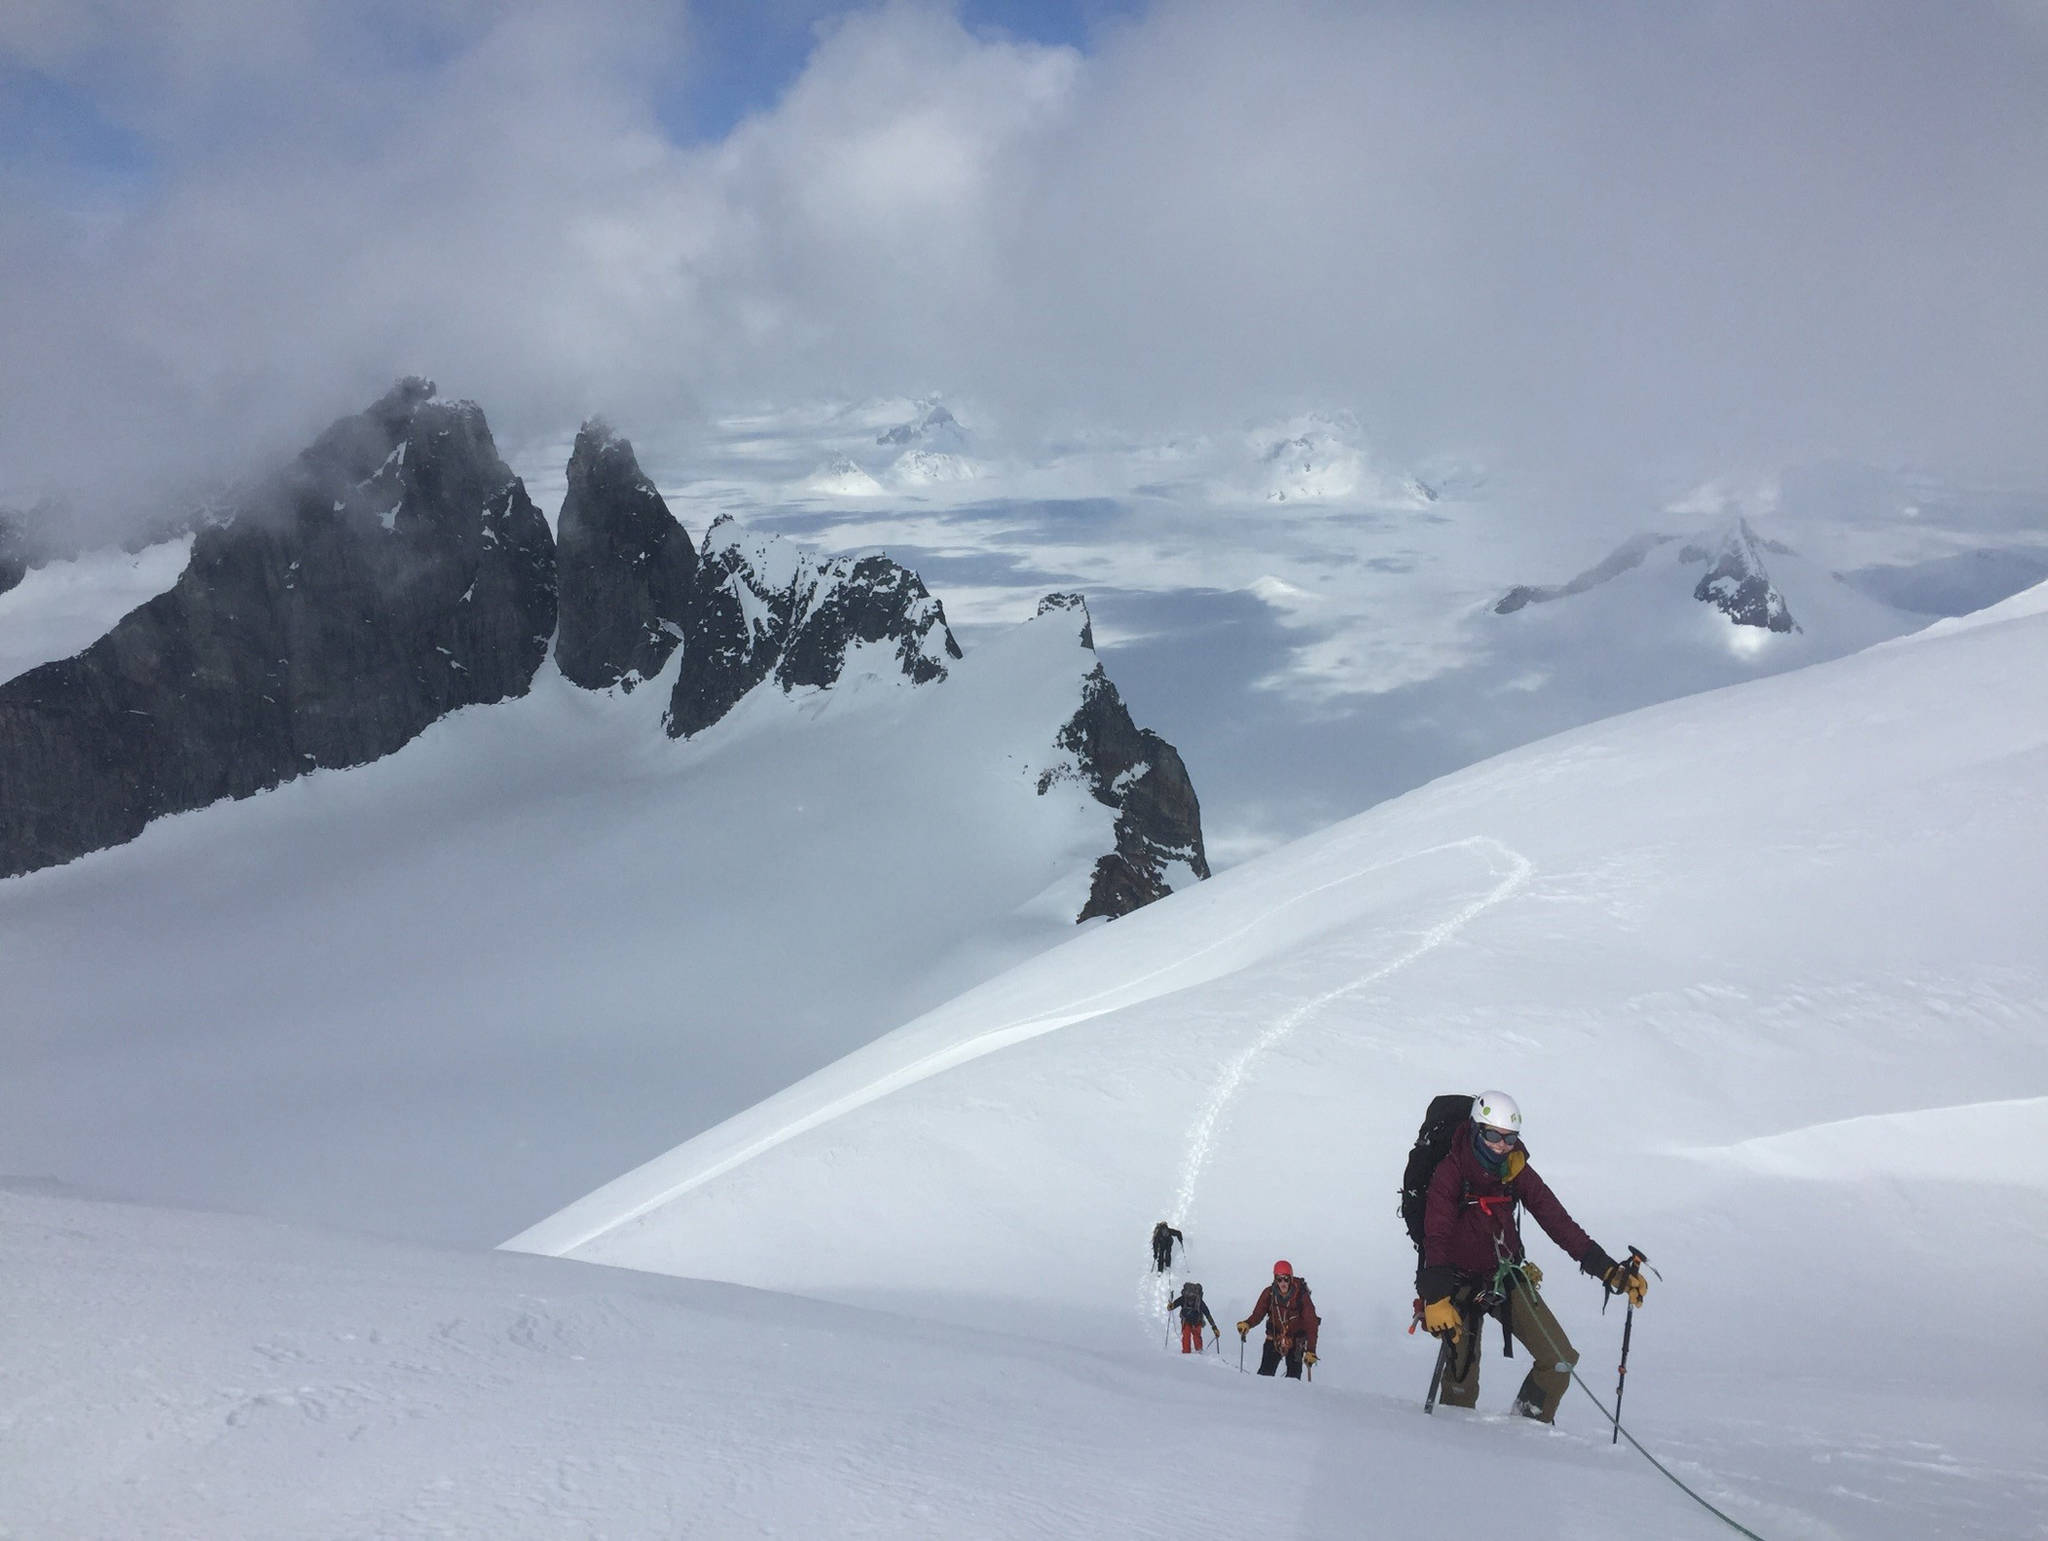 Katie McCaffrey approaches the Summit of Emperor Peak on April 15, the Taku Towers are behind. (Photo by Forest Wagner)